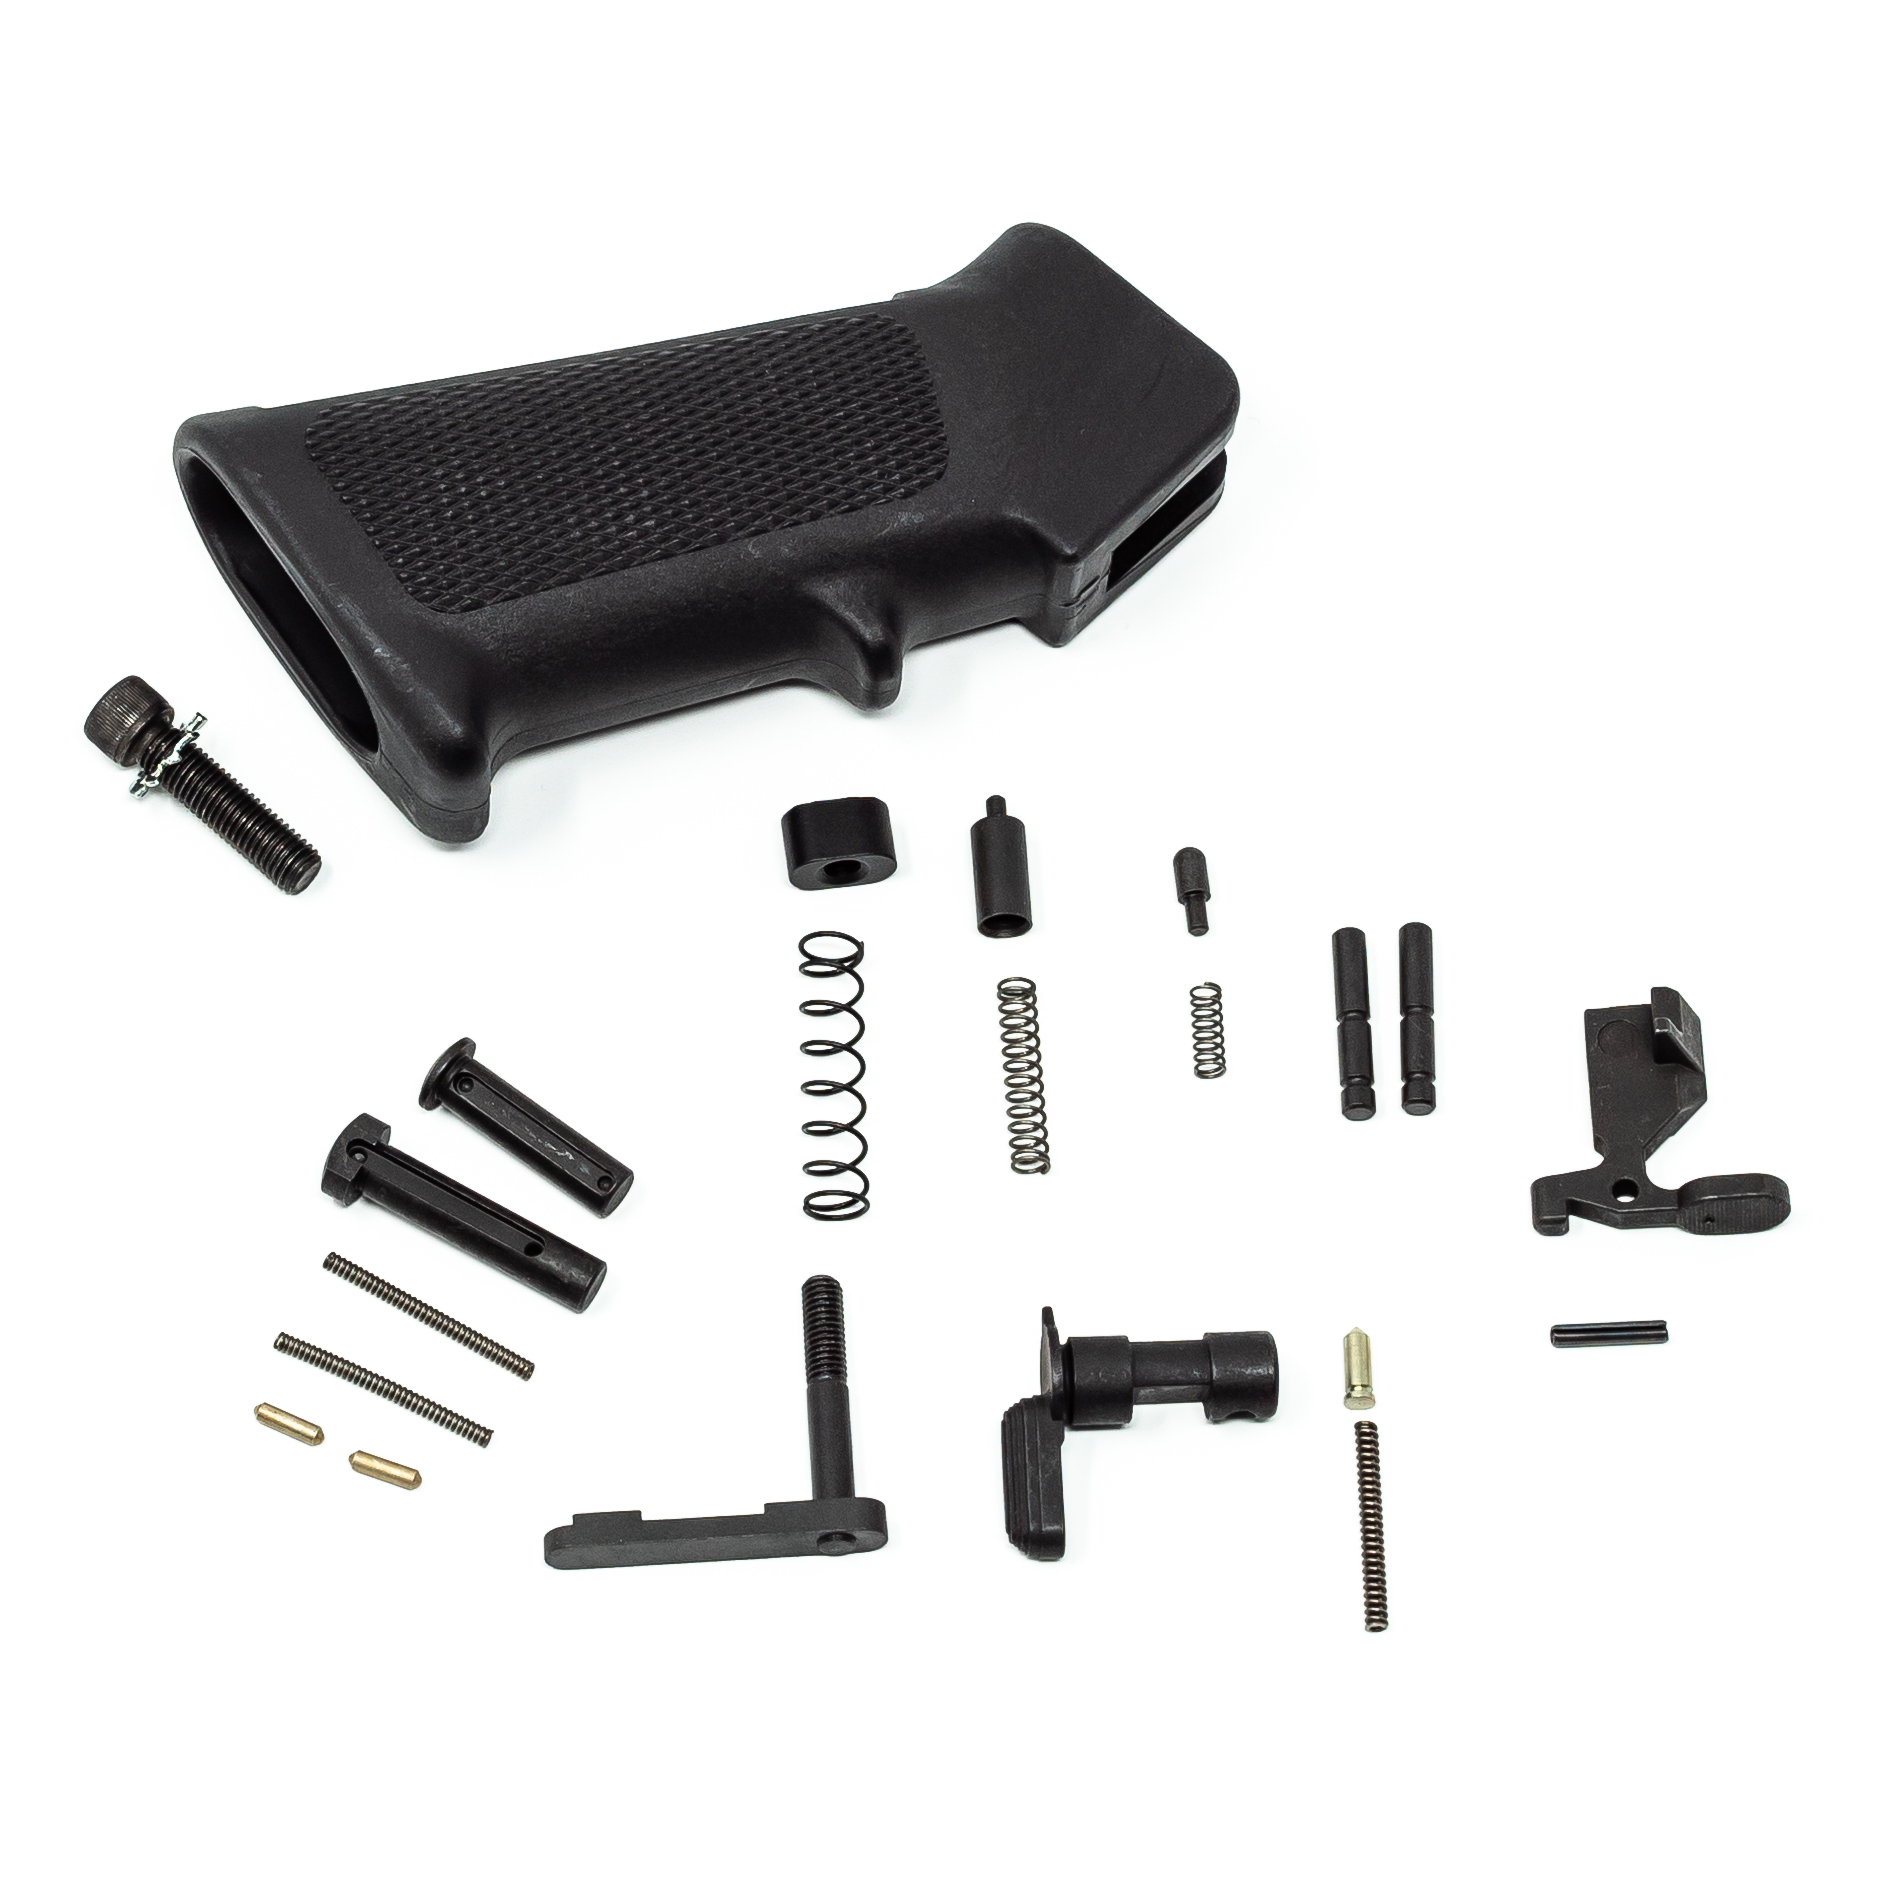 Luth AR Lower Parts Kit - 556